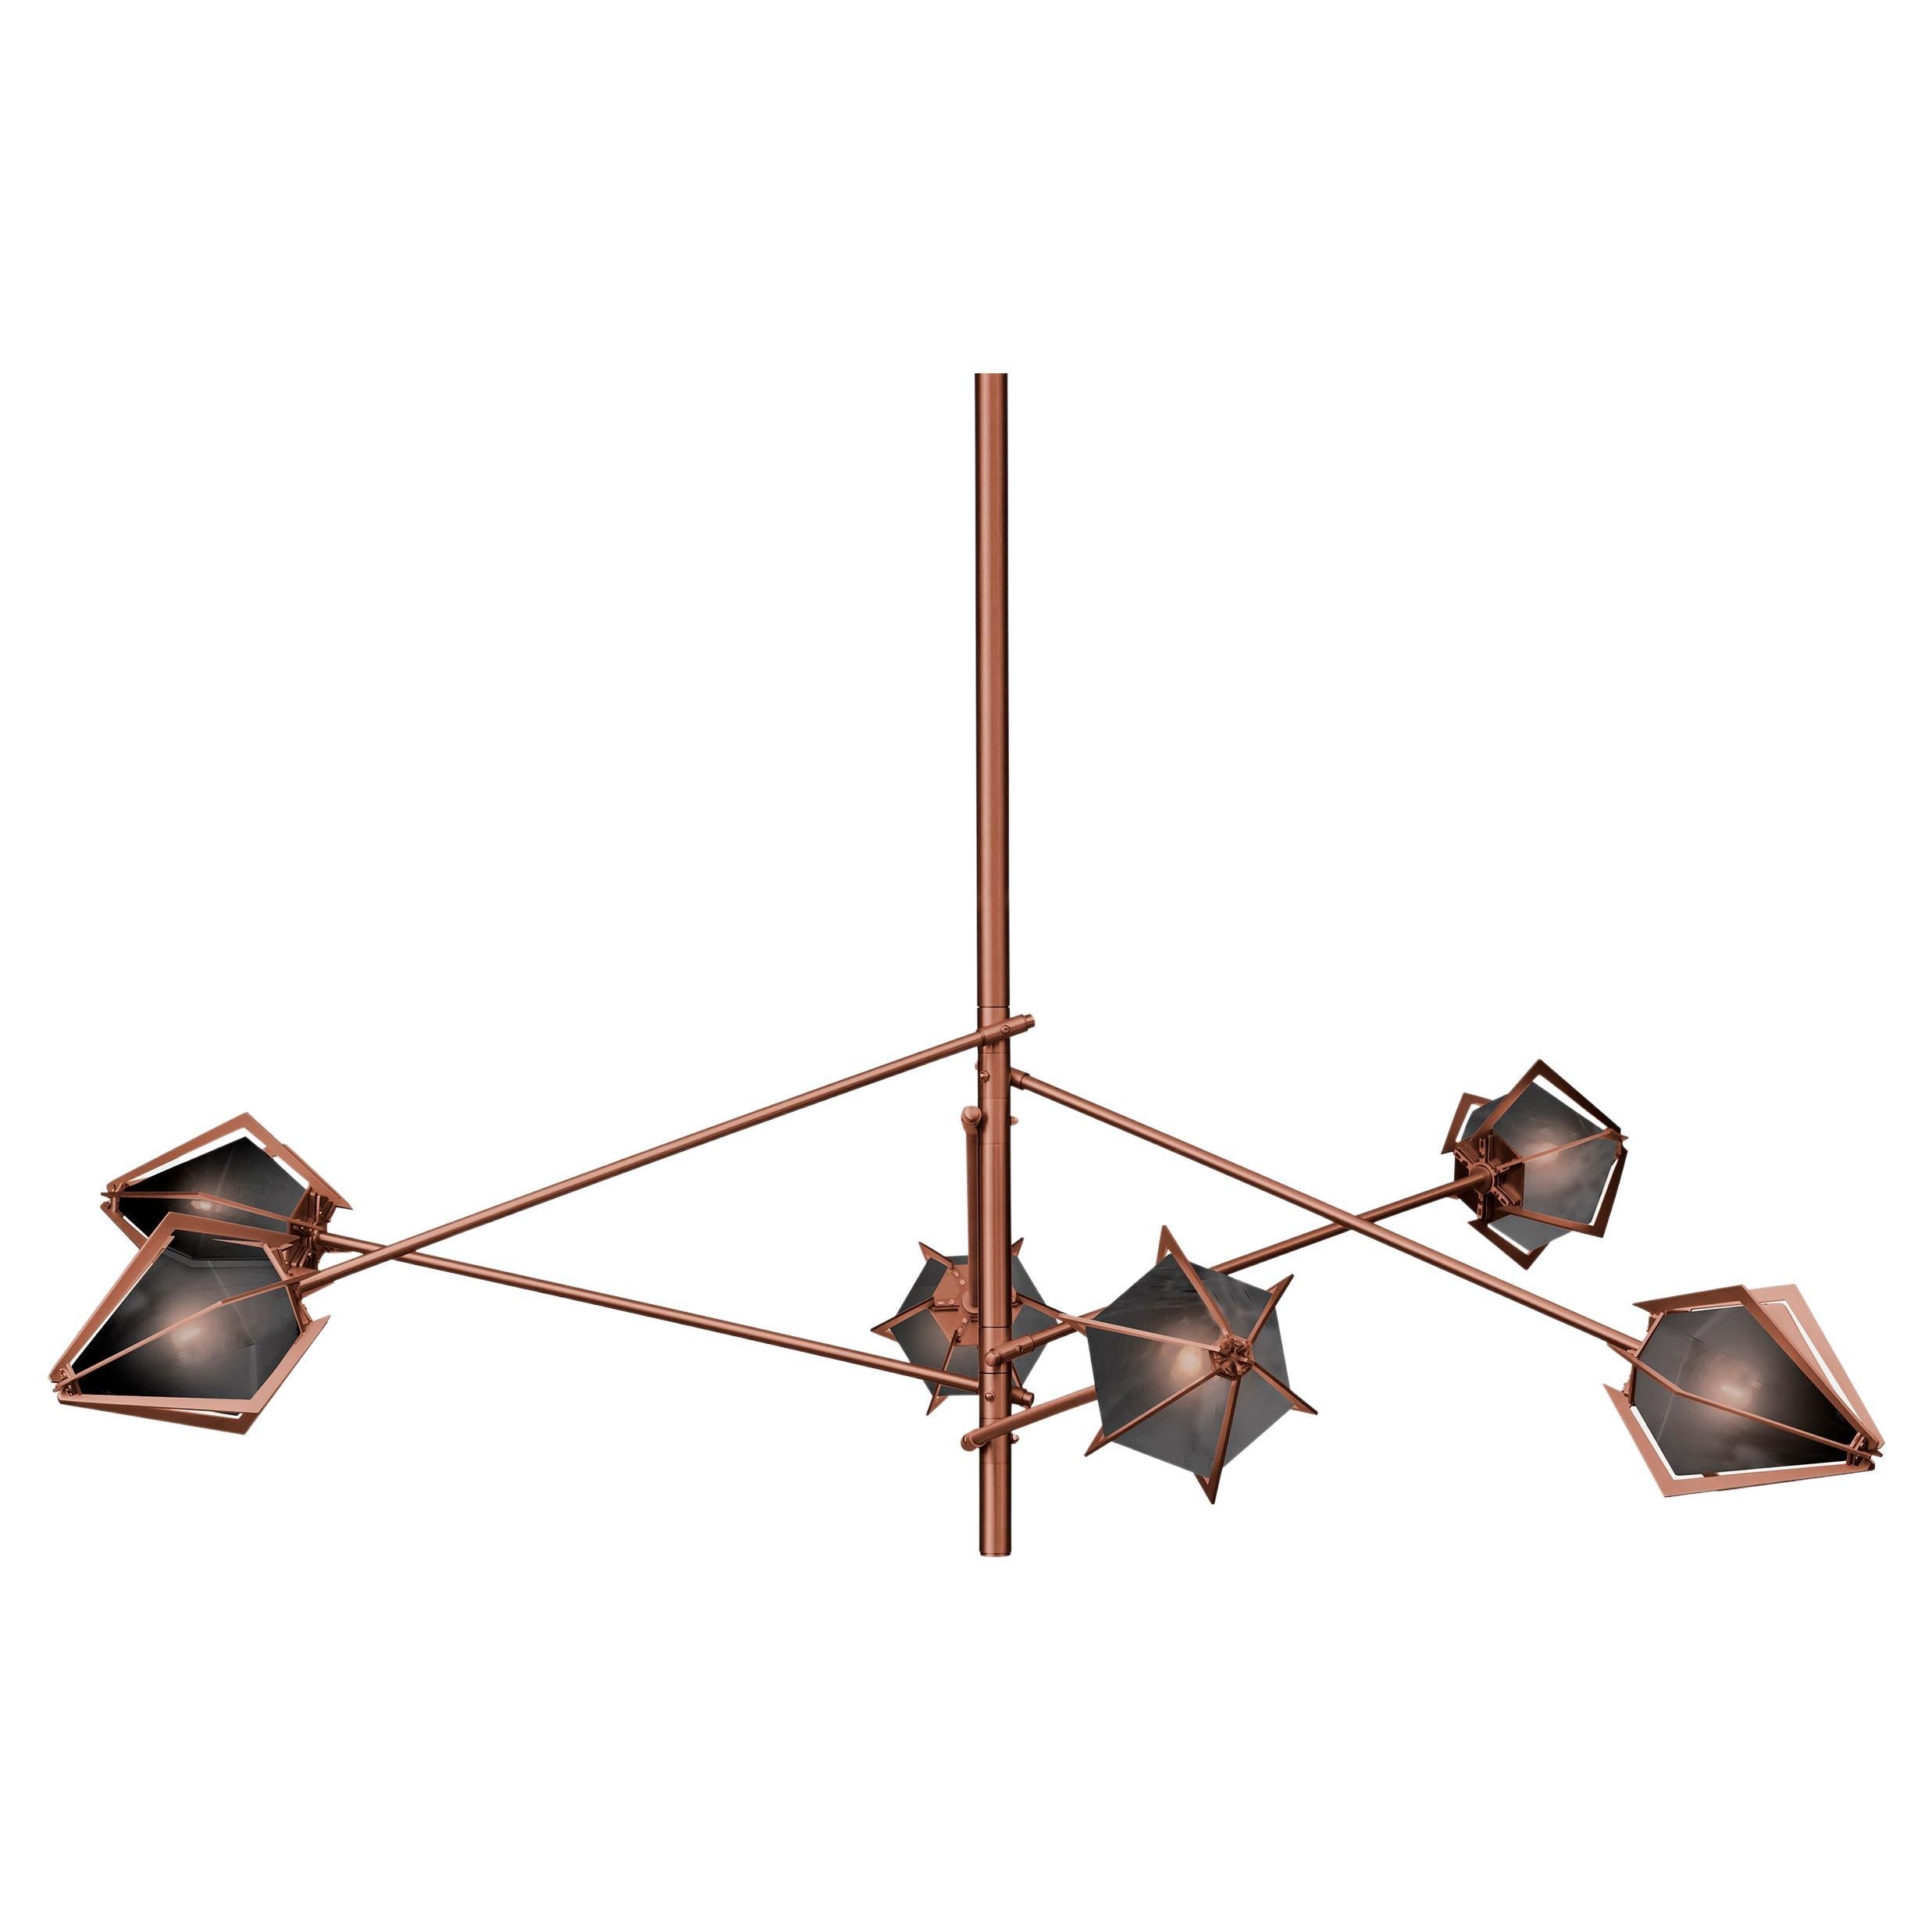 Harlow Spoke Chandelier Large in Satin Copper and Smoked Gray Glass